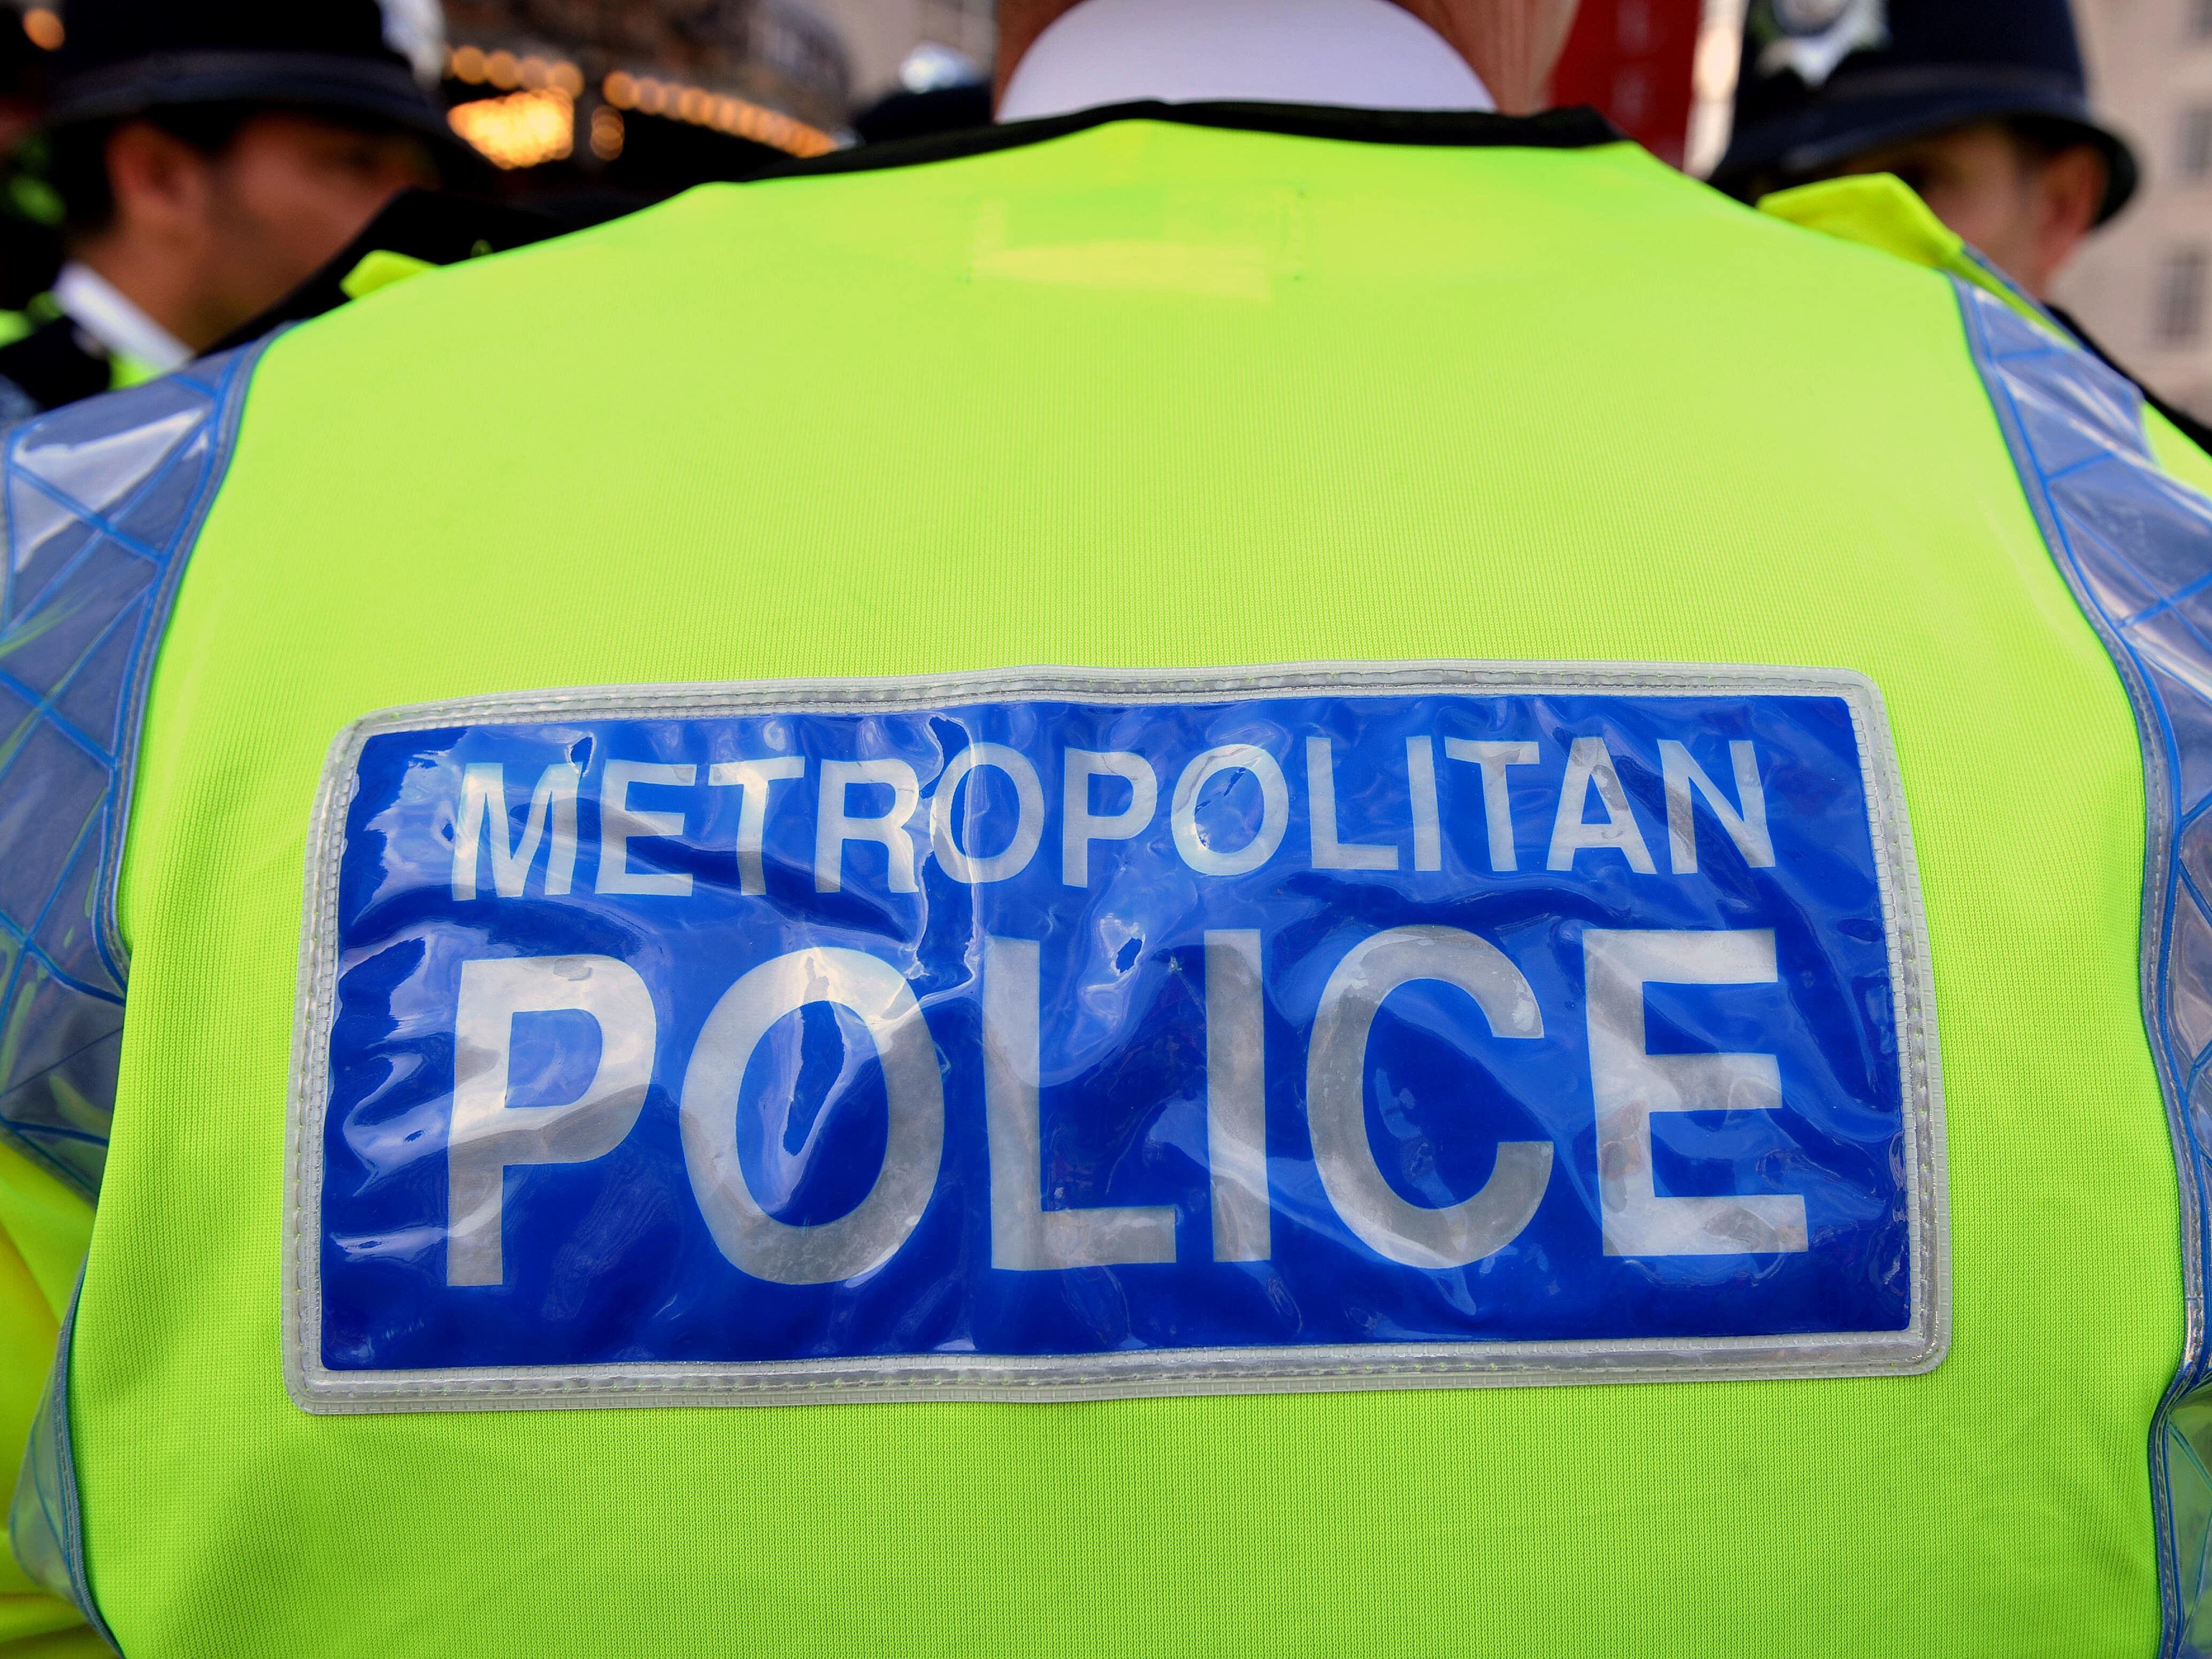 Man arrested after baby found dead in central London